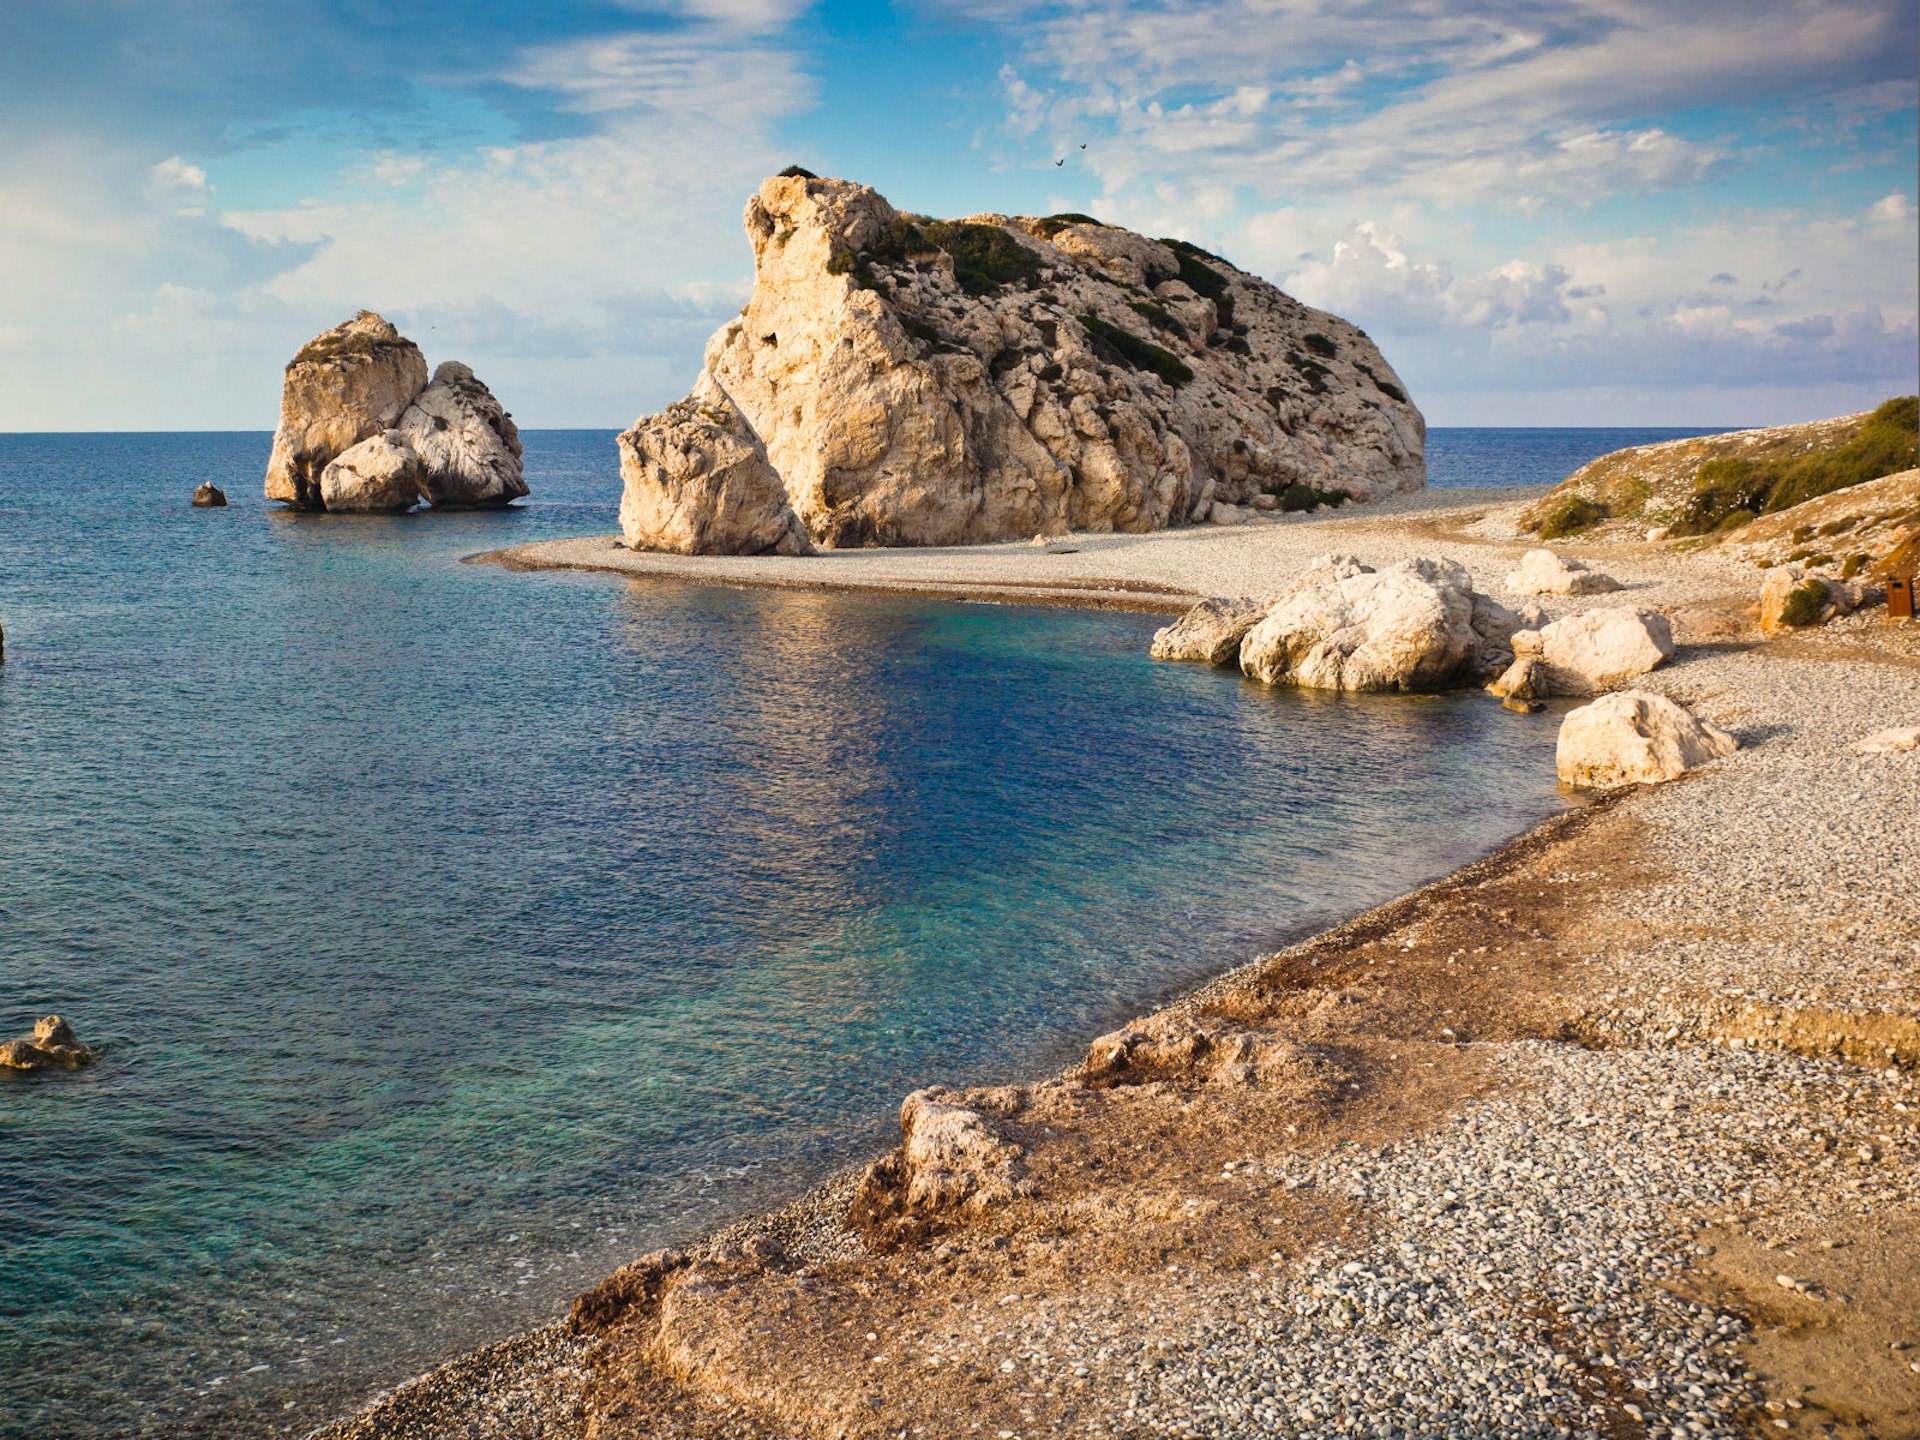 Aphrodite's Rock and Bay in Cyprus © Gabriel Robek / Shutterstock